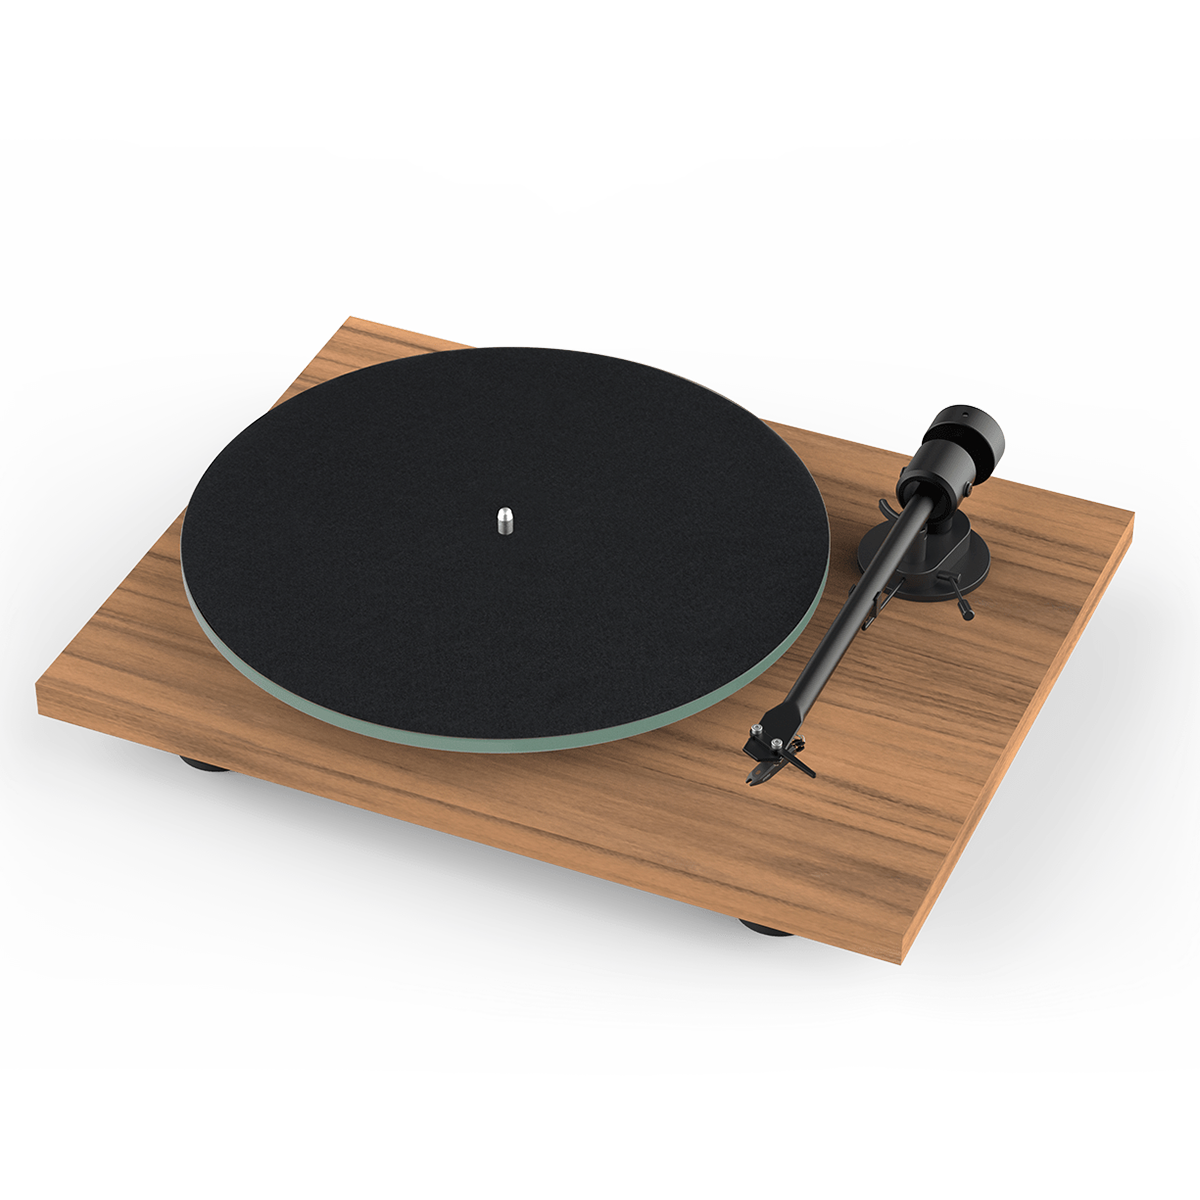 Pro-Ject T1 Phono BT Turntable, Satin Walnut, front angle with felt mat